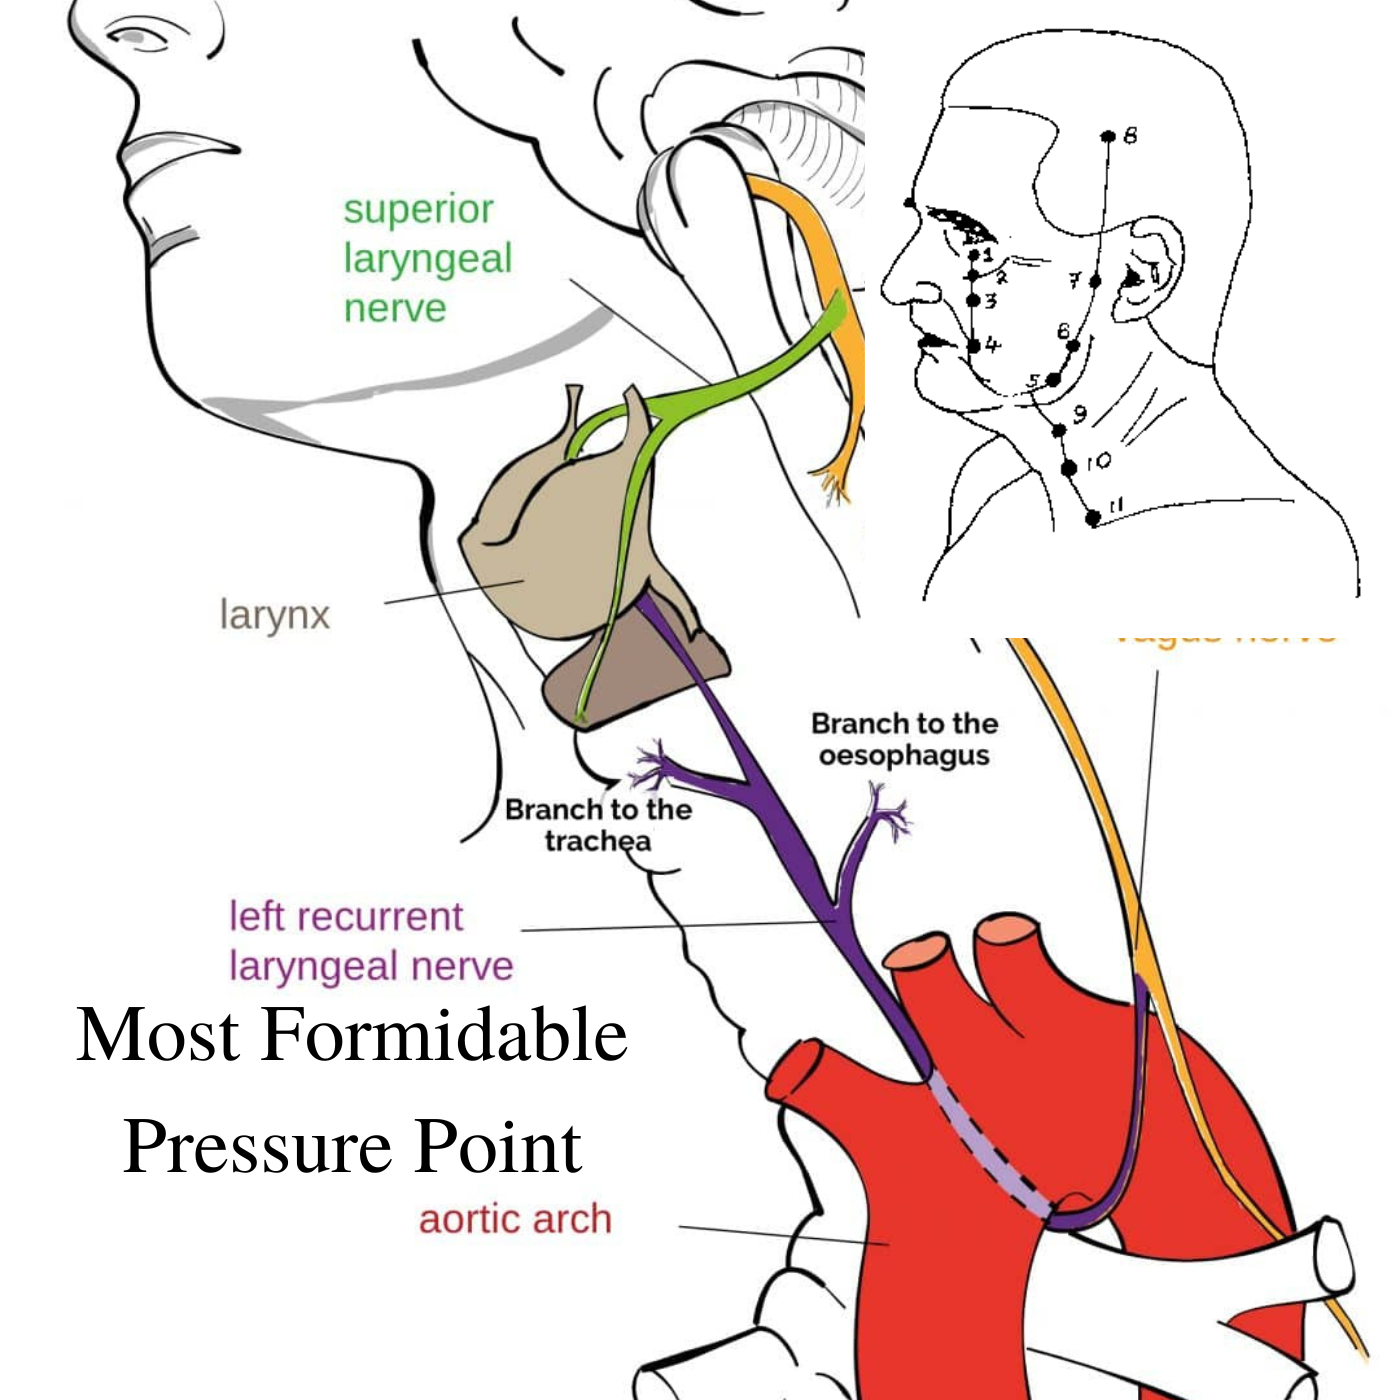 Most Formidable Pressure Point